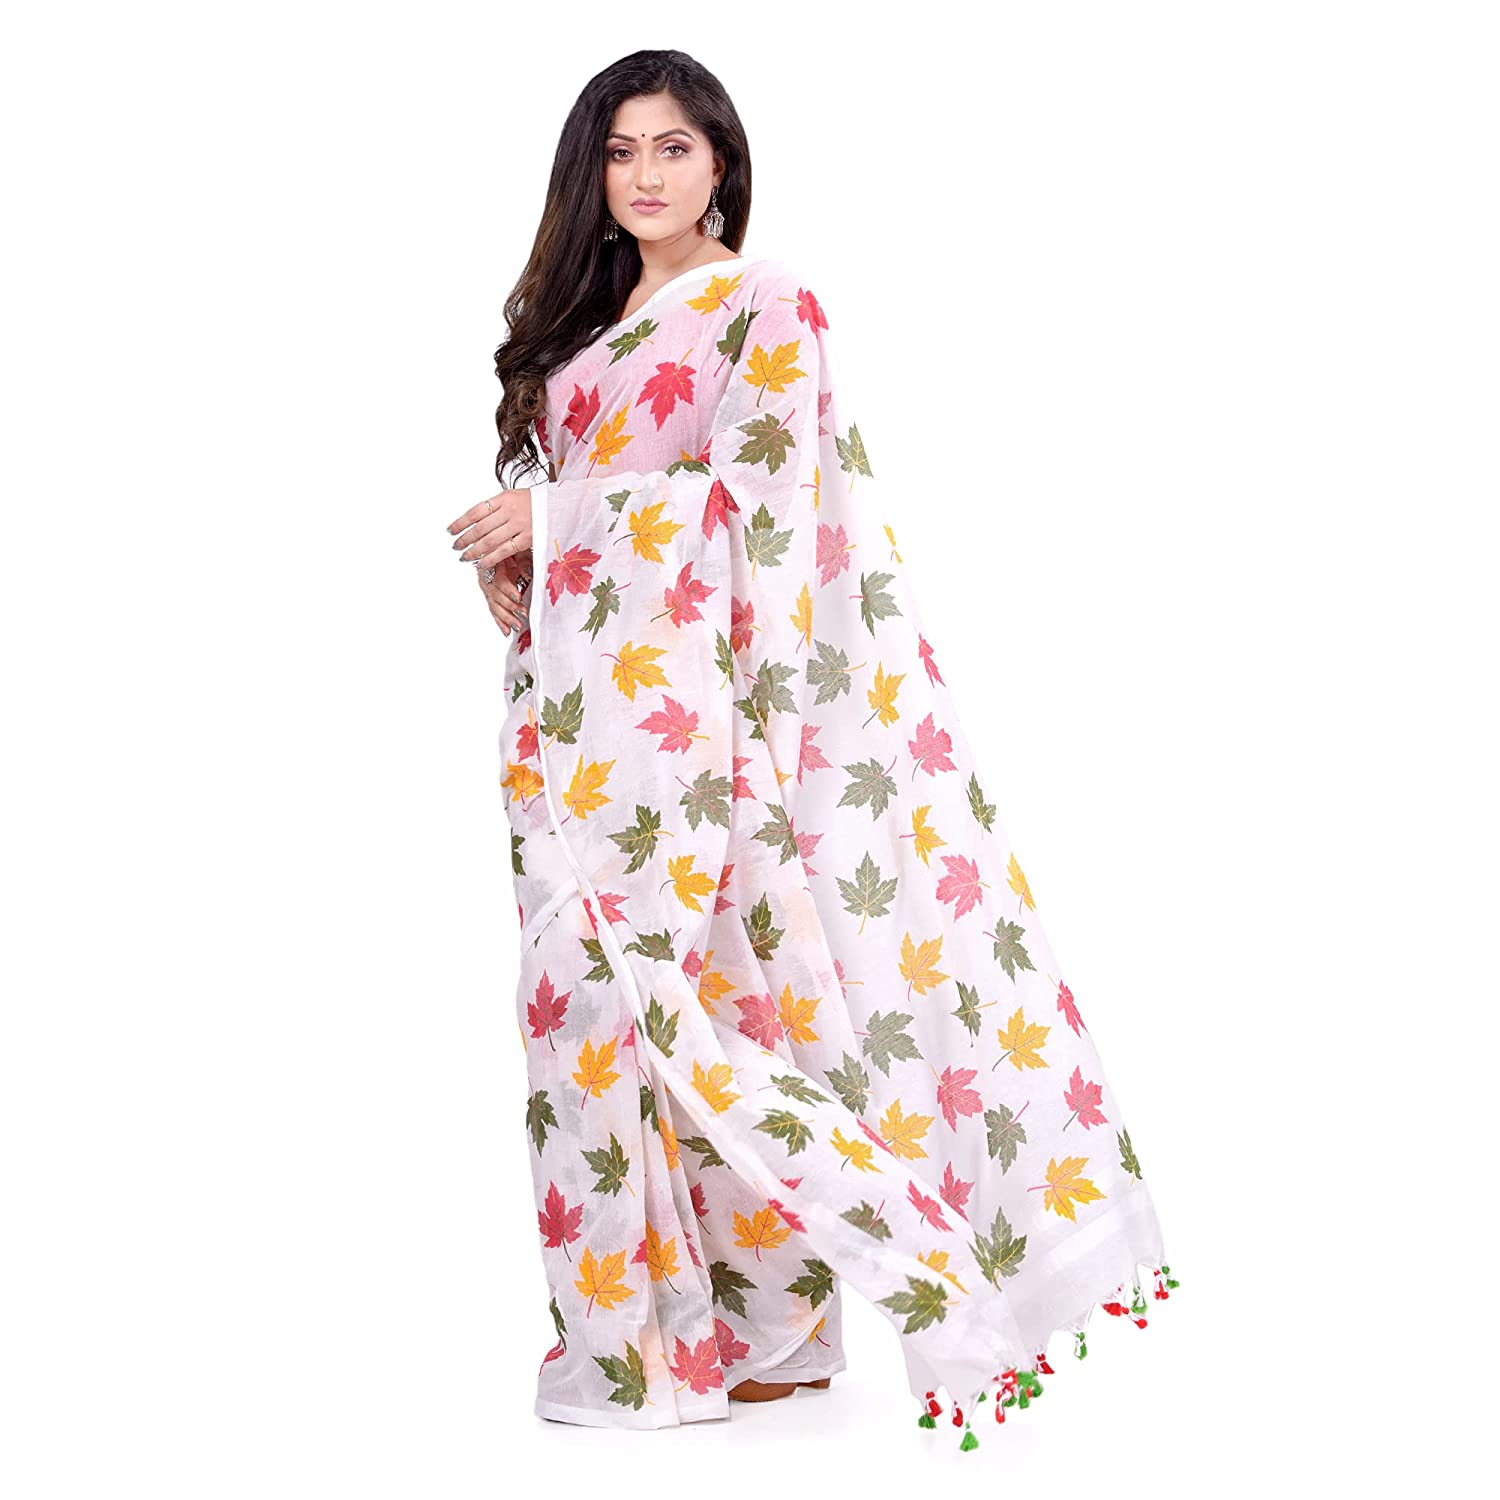 dB DESH BIDESH Women`s Traditional Soft Mulmul Maple Leaf Design Bengal Handloom Pure Cotton Saree Without Blouse Piece Red Yellow Green